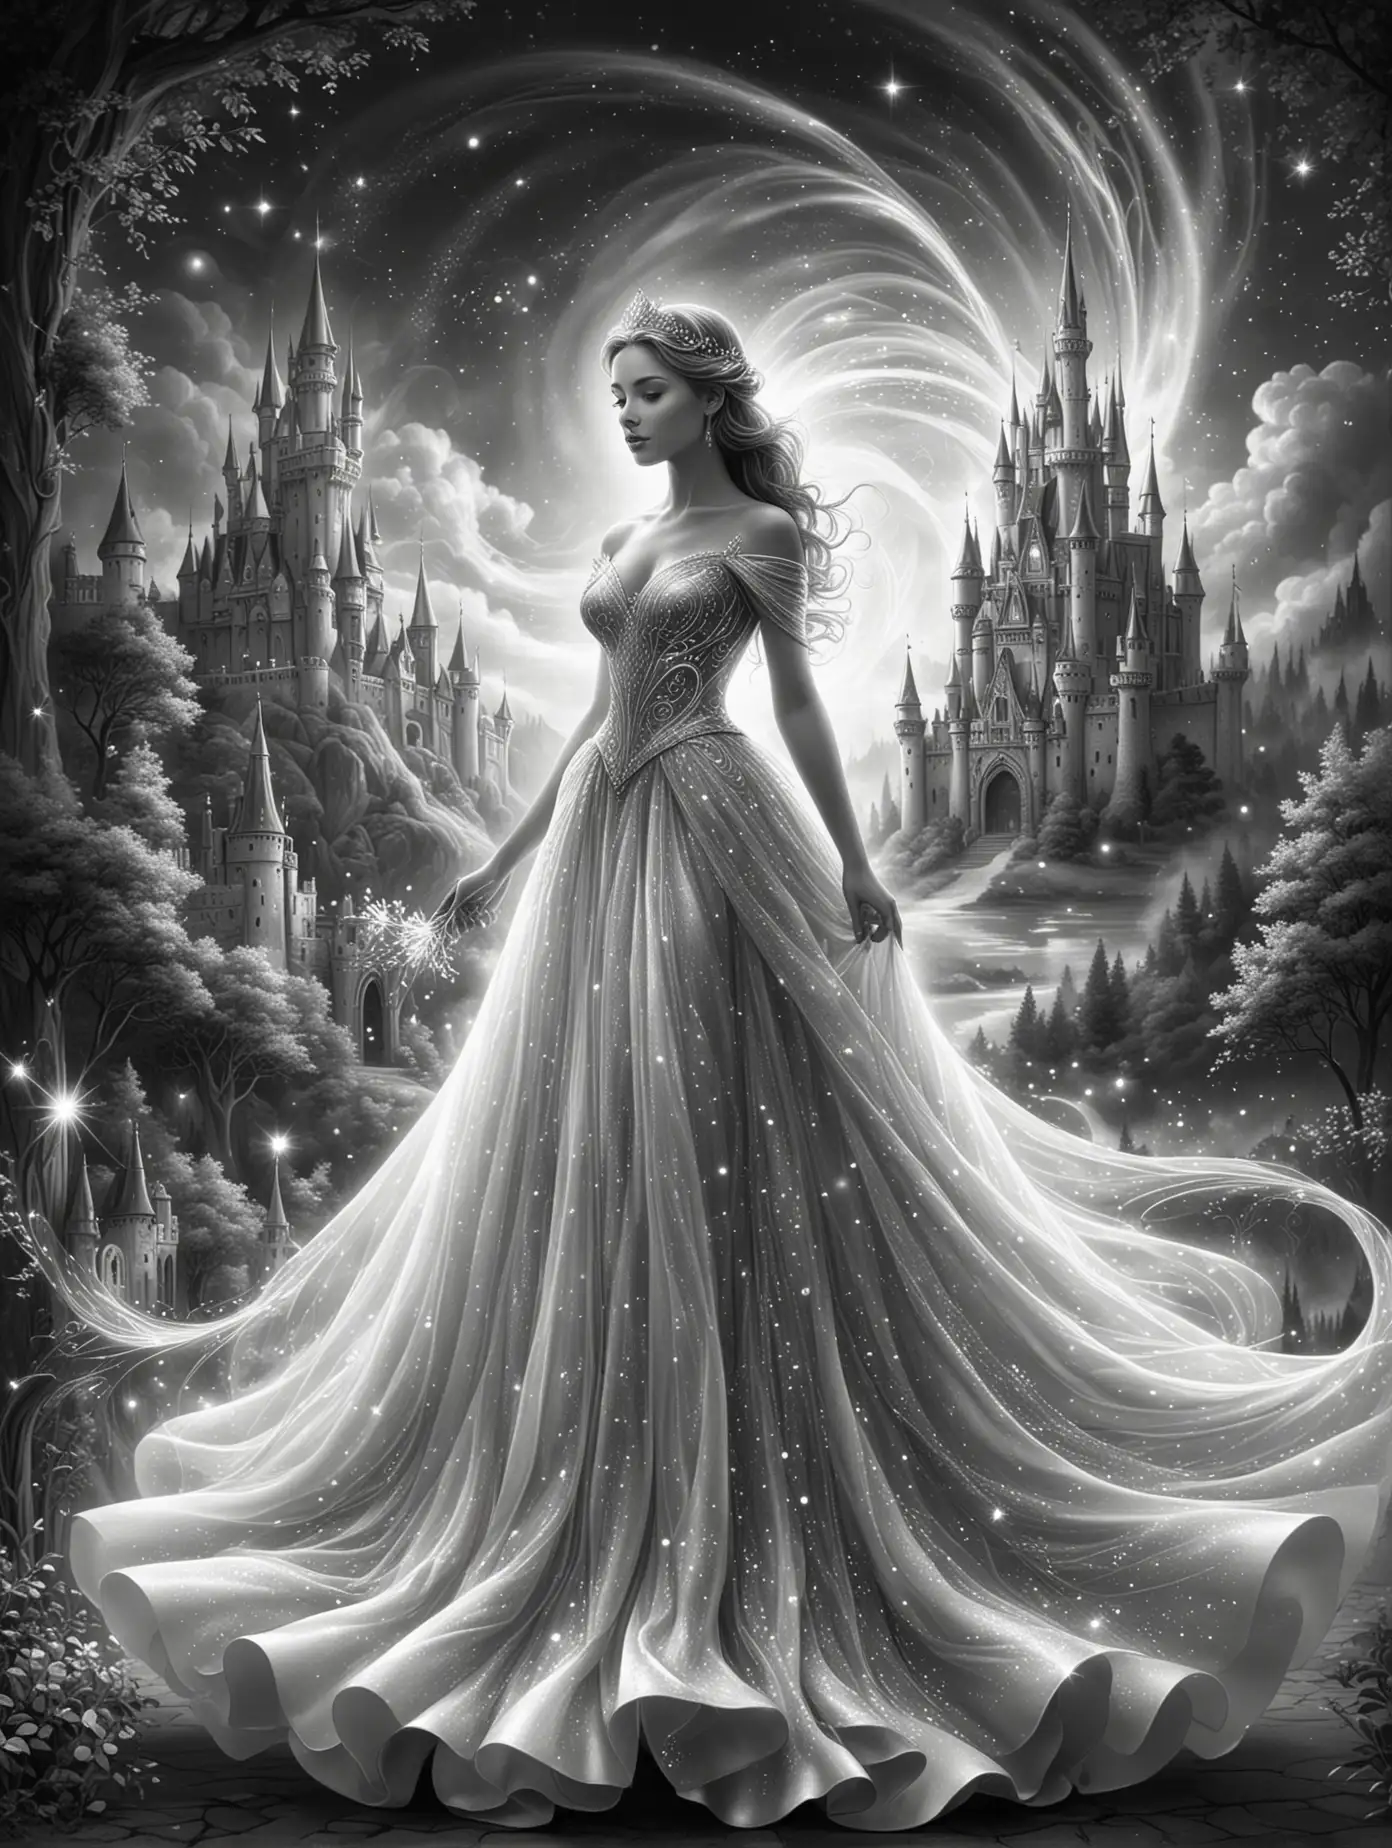 Enchanting Princess in Iridescent Gown with FairyTale Castle Background